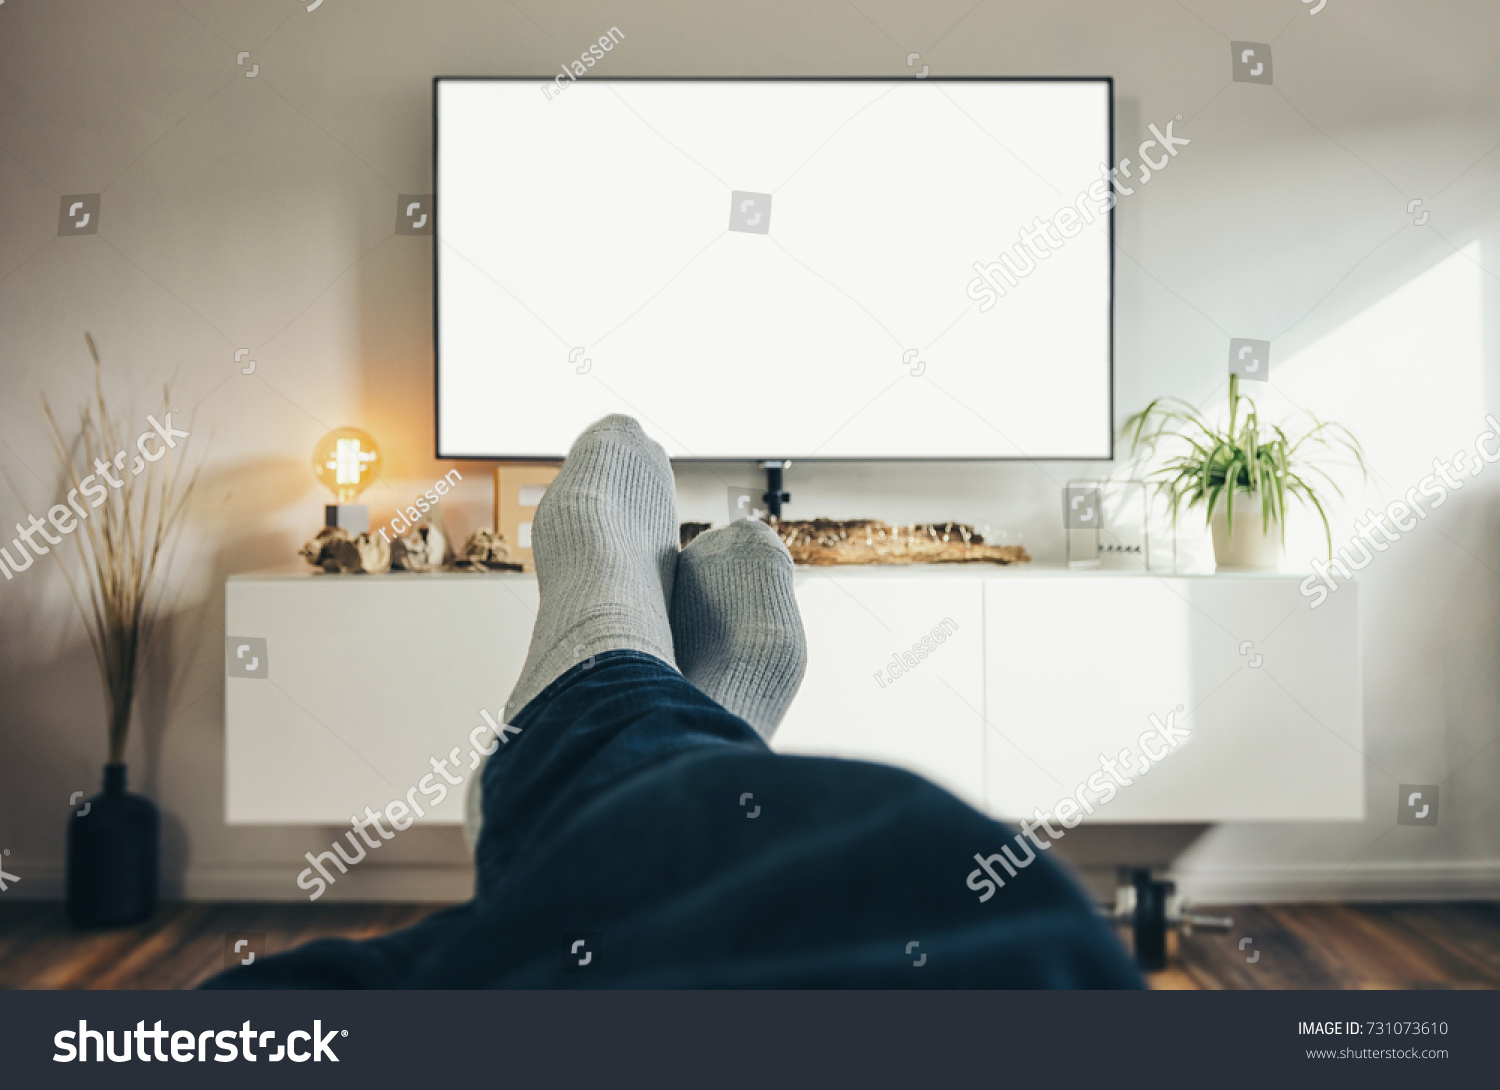 Man Watching TV in his living room, point of view perspective. #731073610